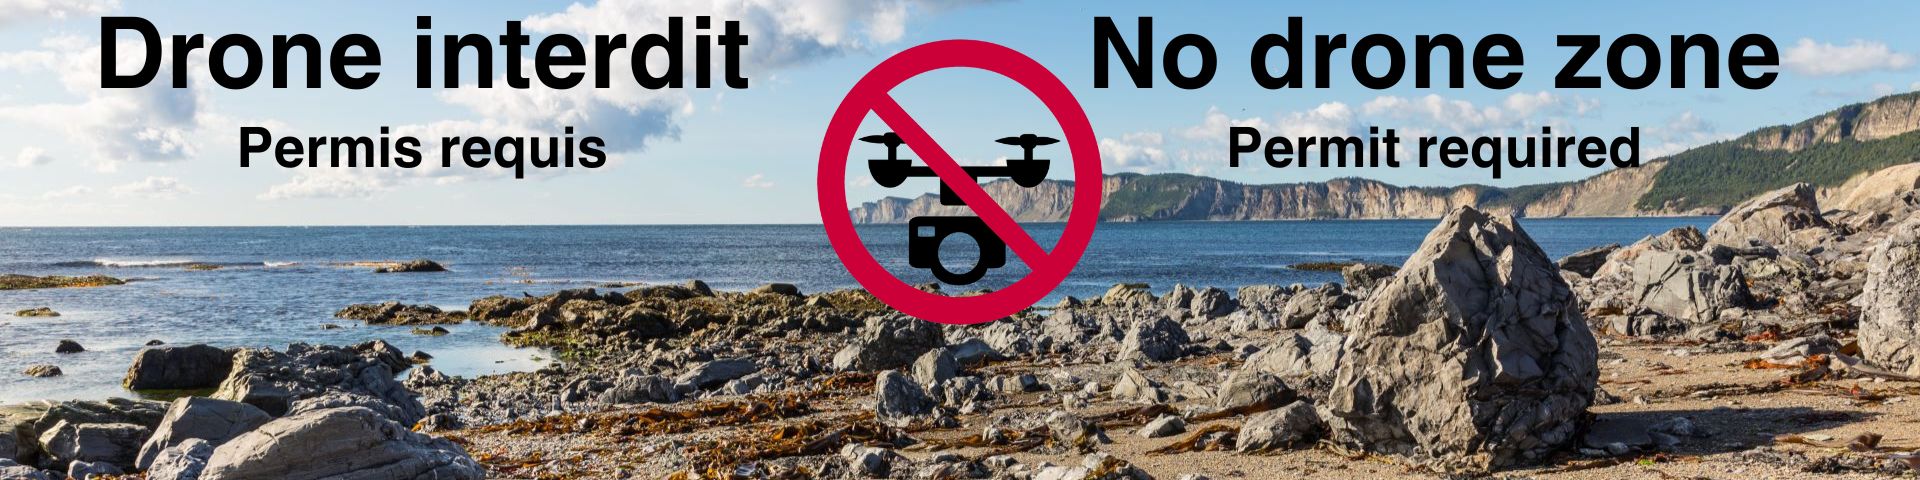  Coastal landscape with a sign reading "No drone zone, Permit required".